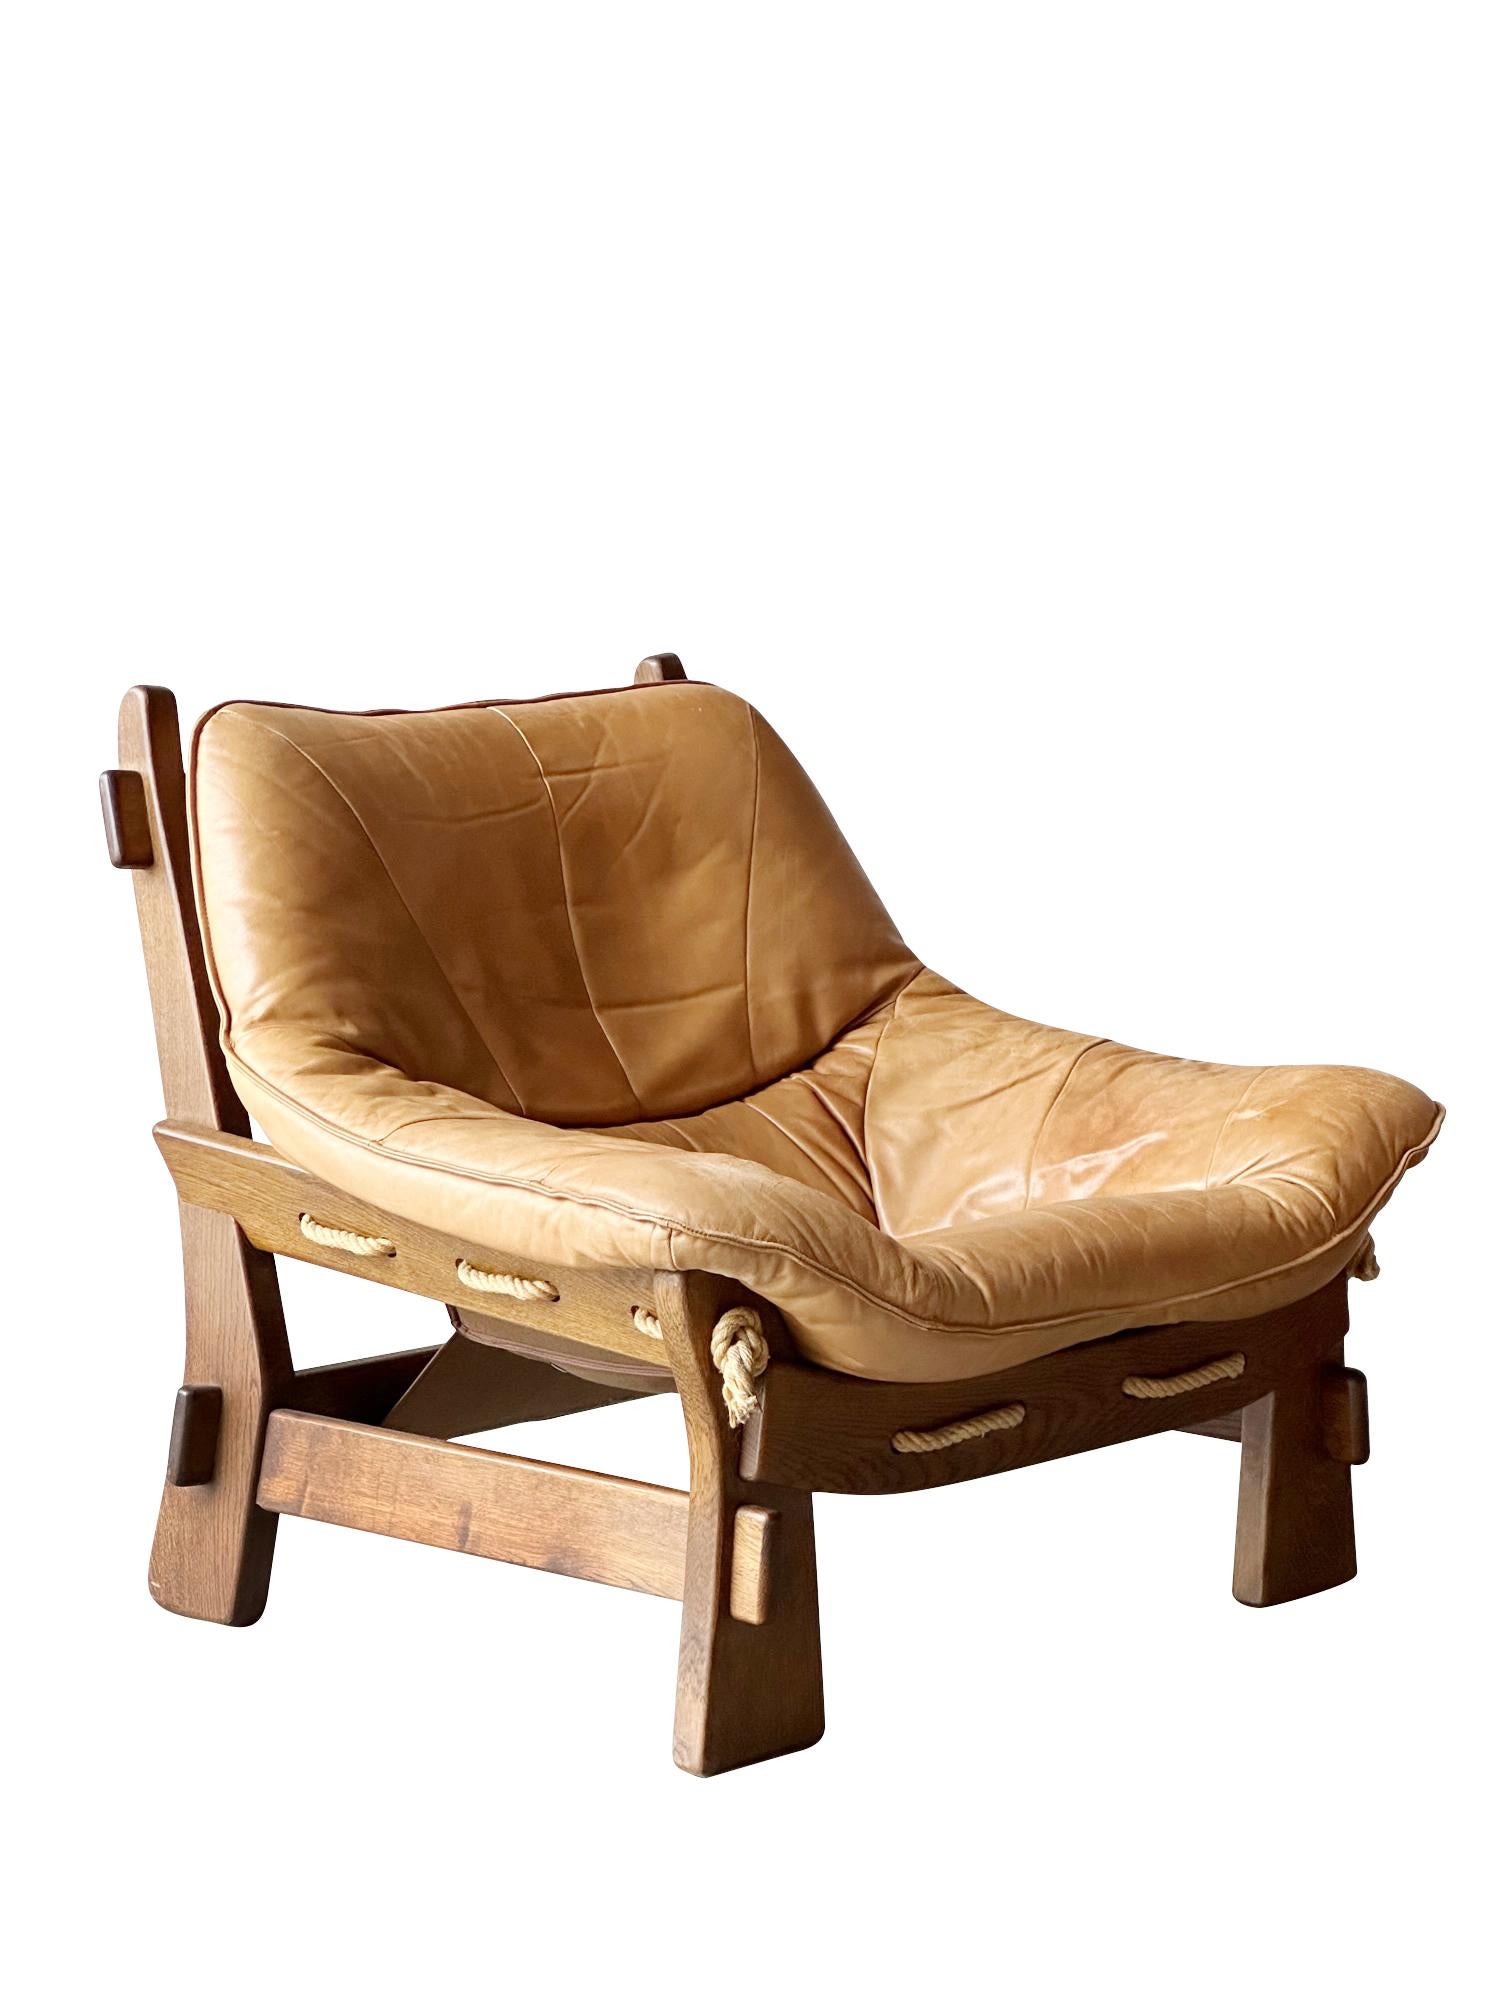 camel color leather chair